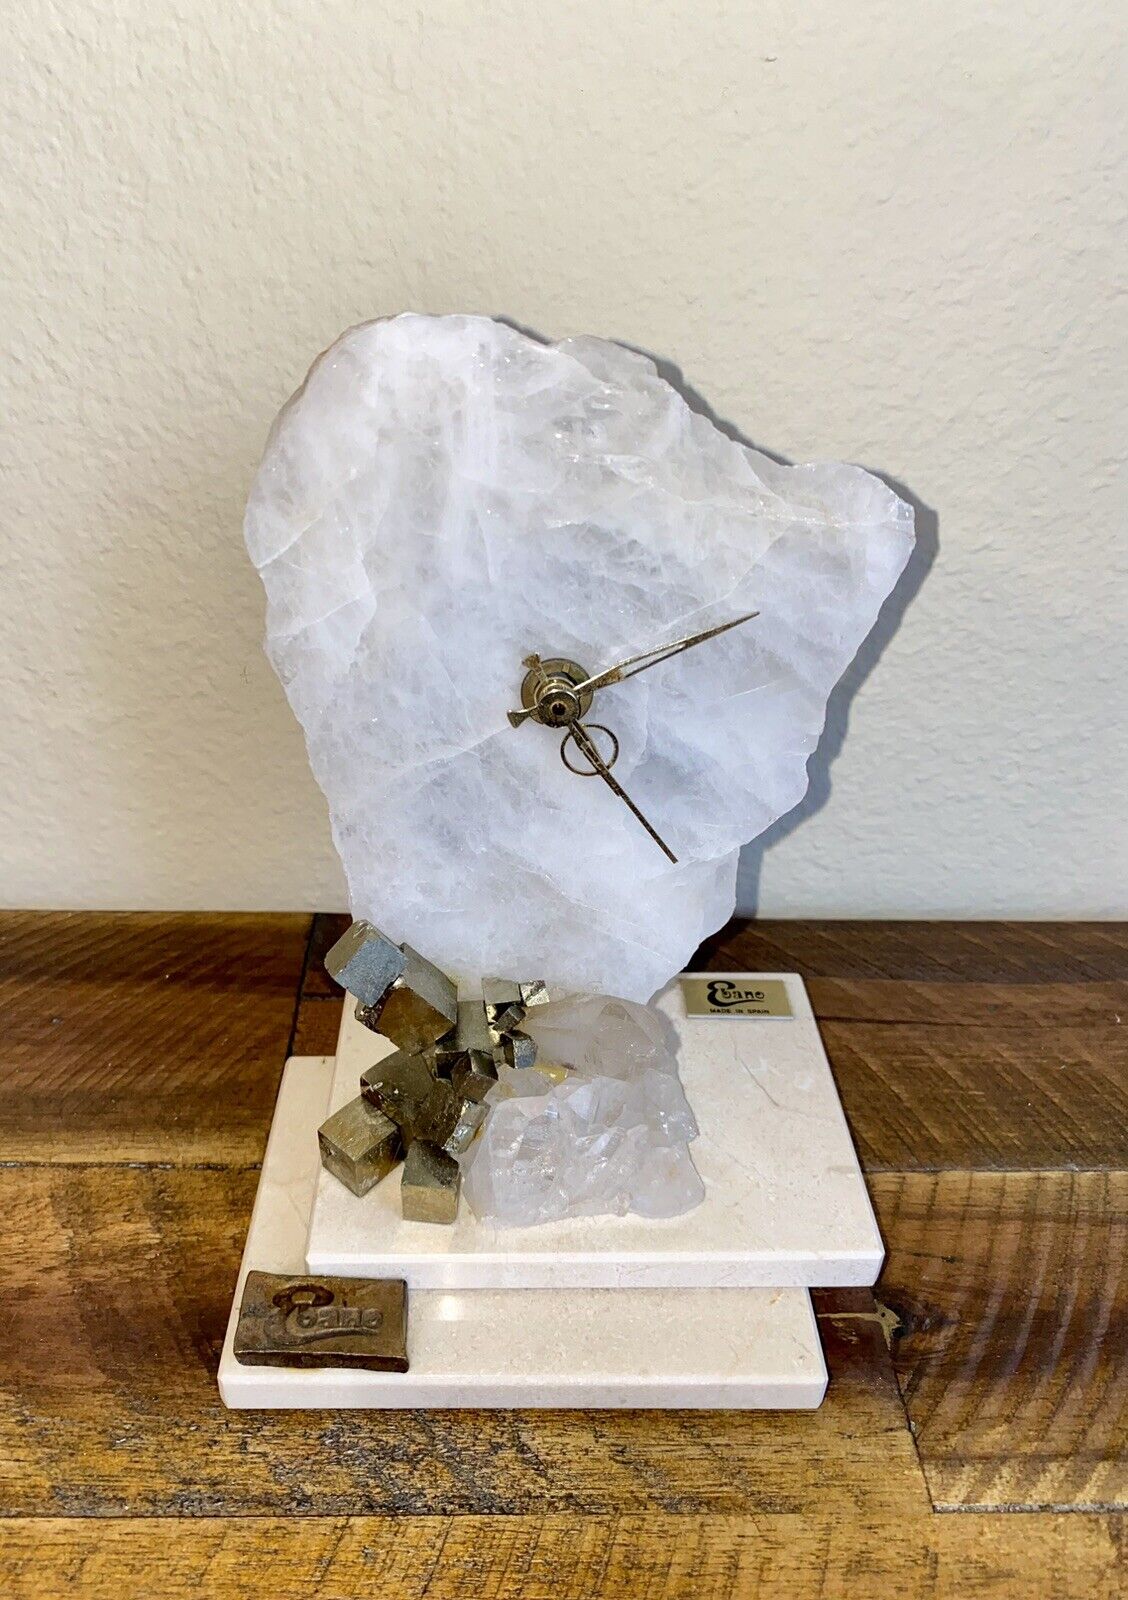 Very Unique Clock With Clear Crystal Quarts and Pyrite. ￼7” Tall Made In Spain.